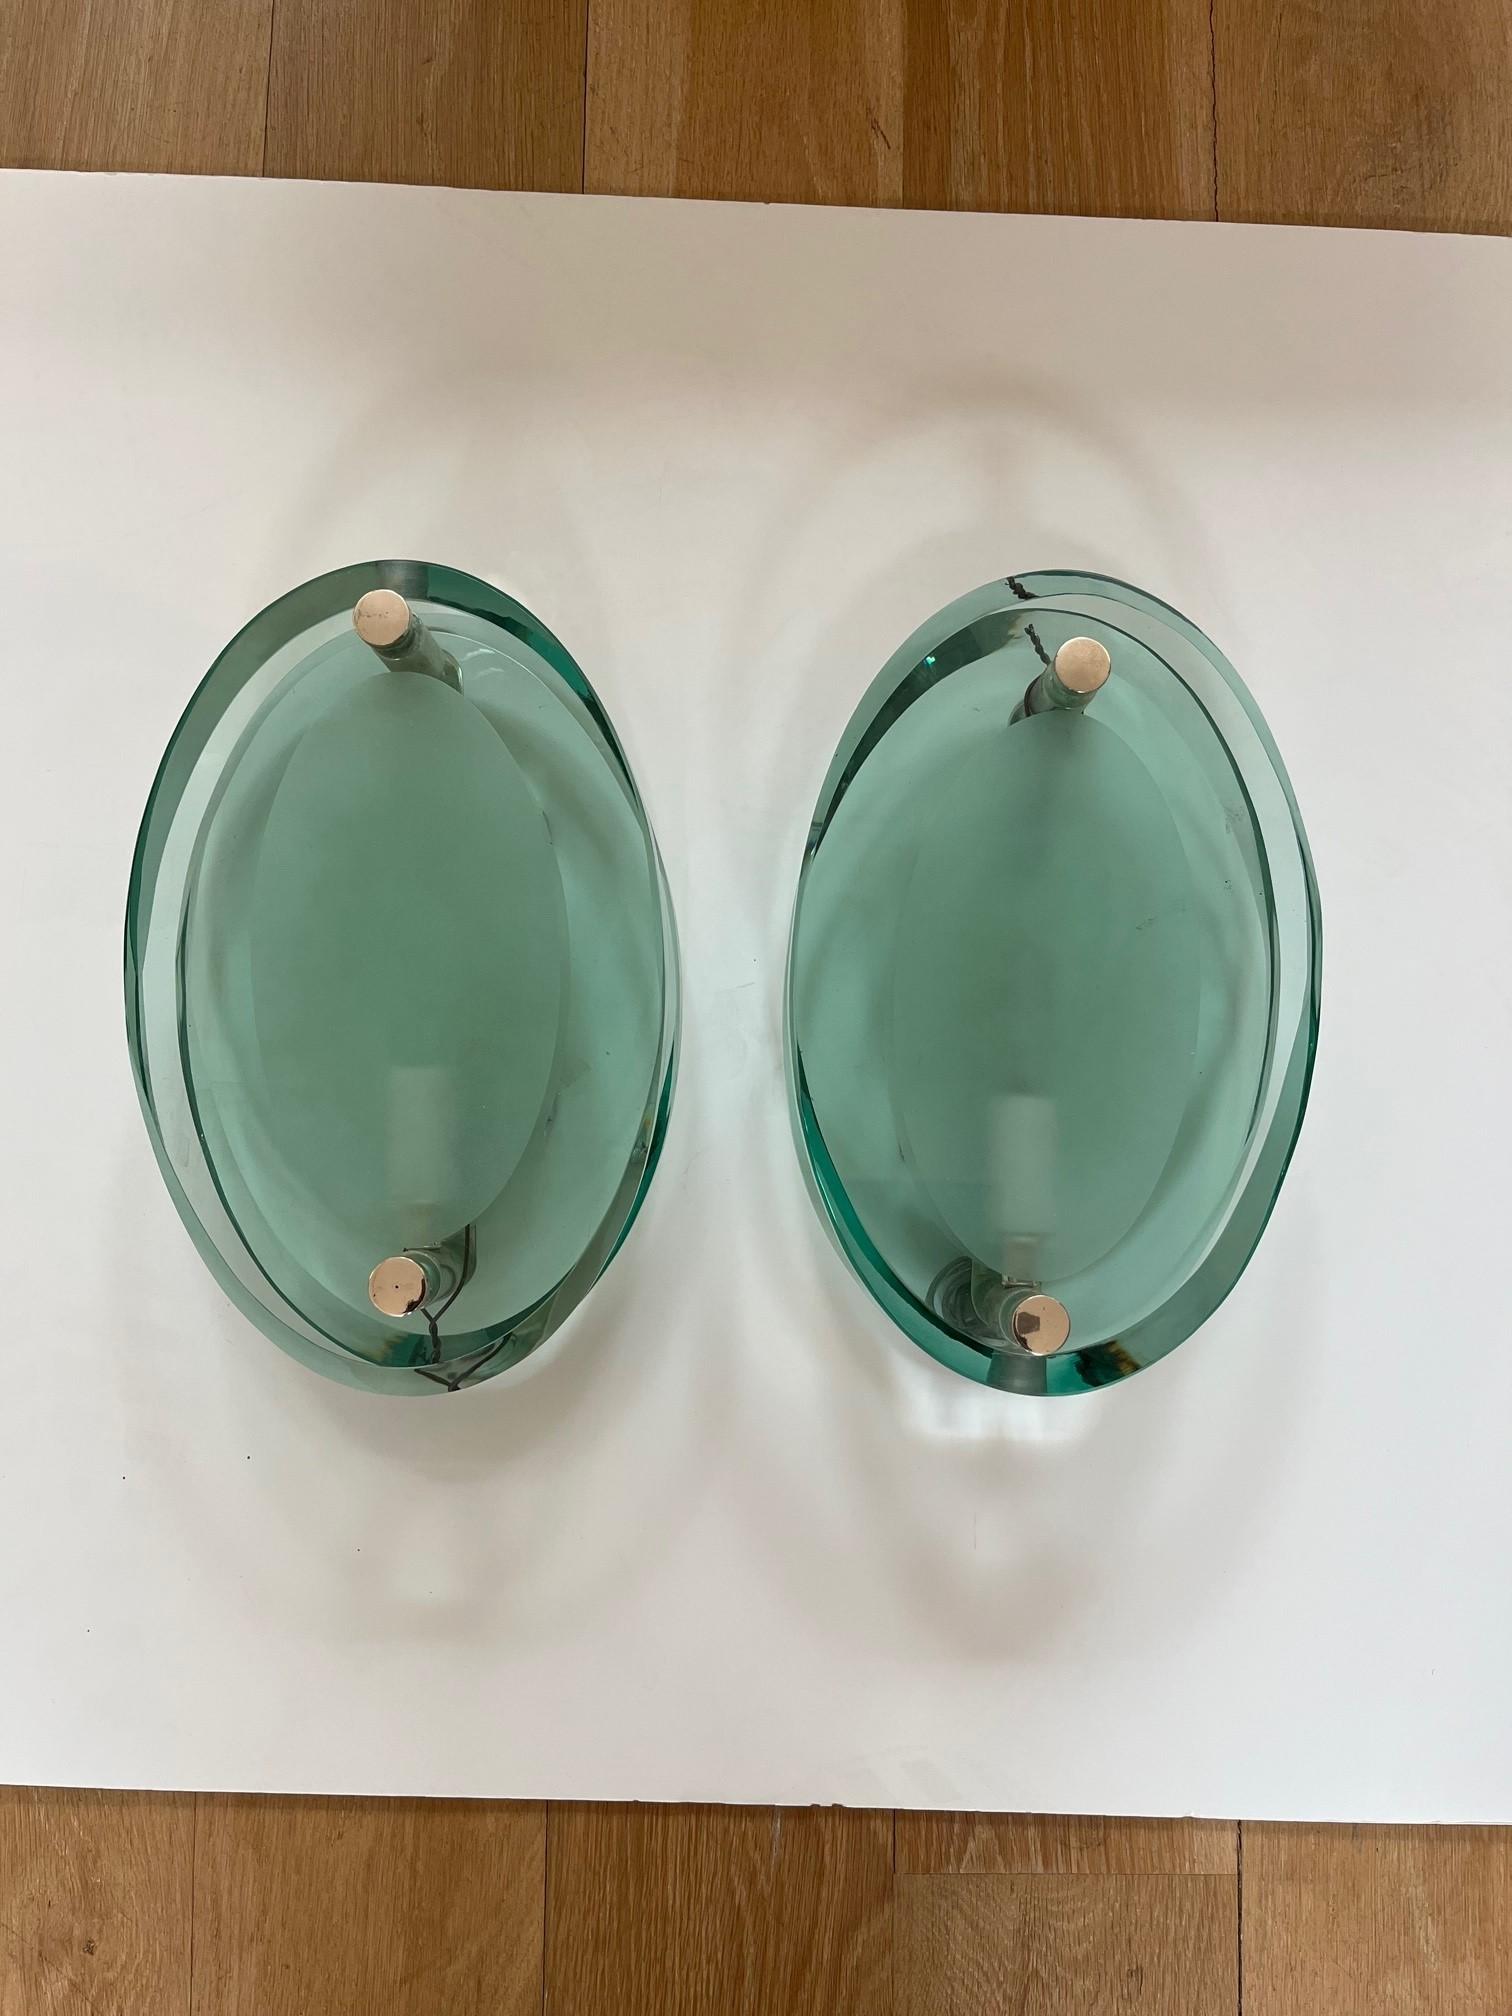 Hand-Crafted Pair of Fontana Arte Style Art Deco Modern Green Crystal Glass Wall Sconces